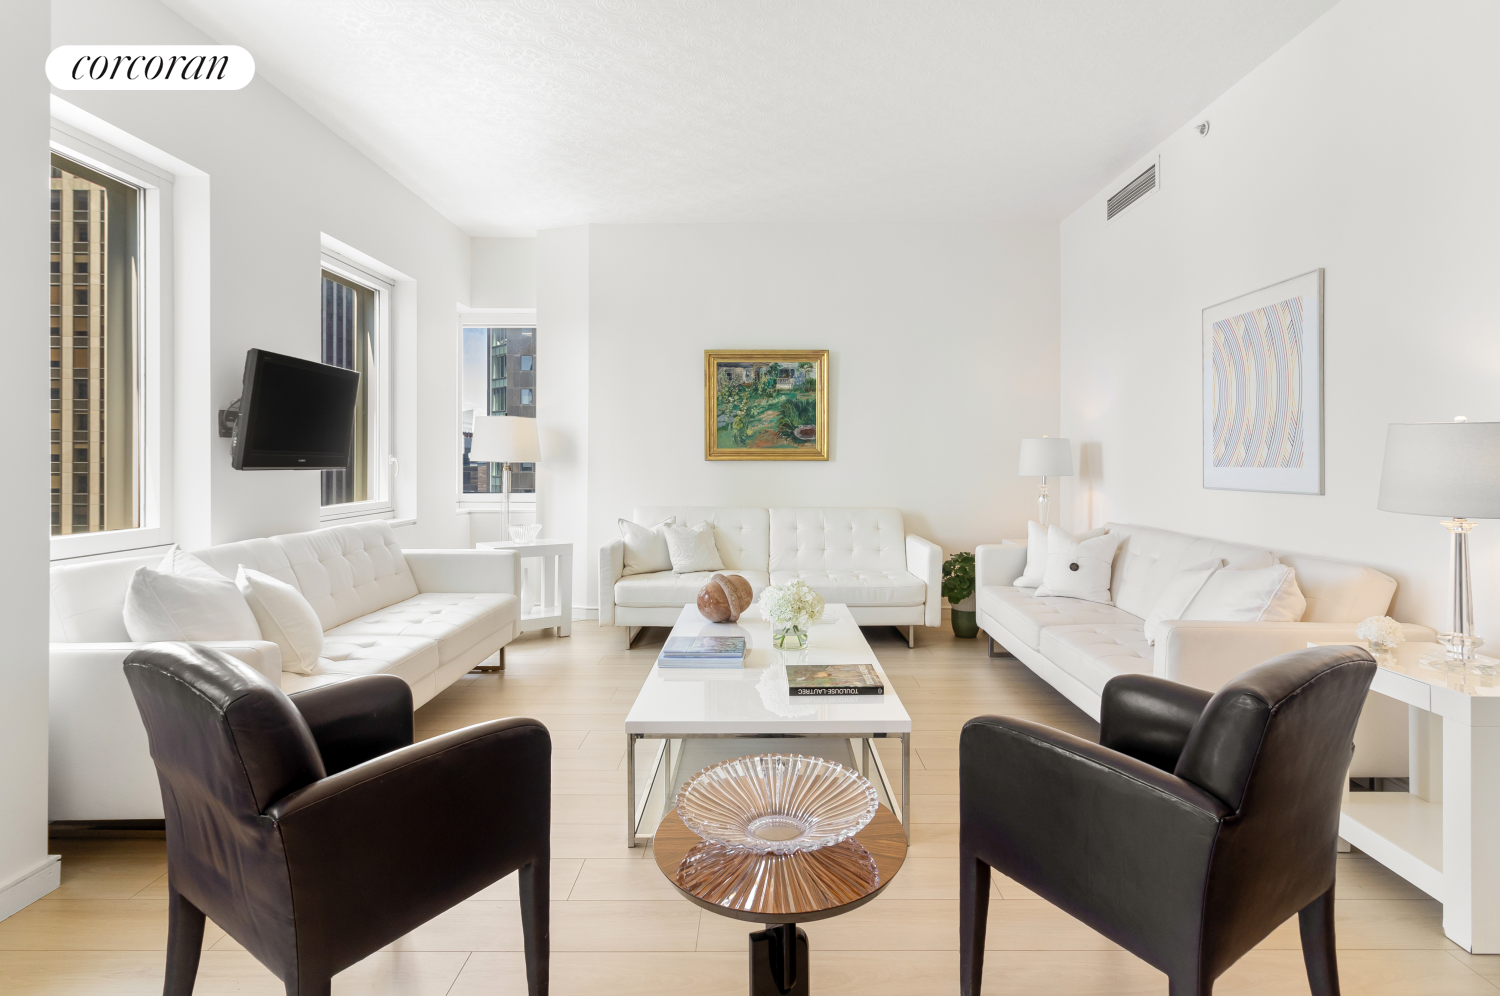 70 West 45th Street Ph1, Chelsea And Clinton, Downtown, NYC - 4 Bedrooms  
3.5 Bathrooms  
8 Rooms - 